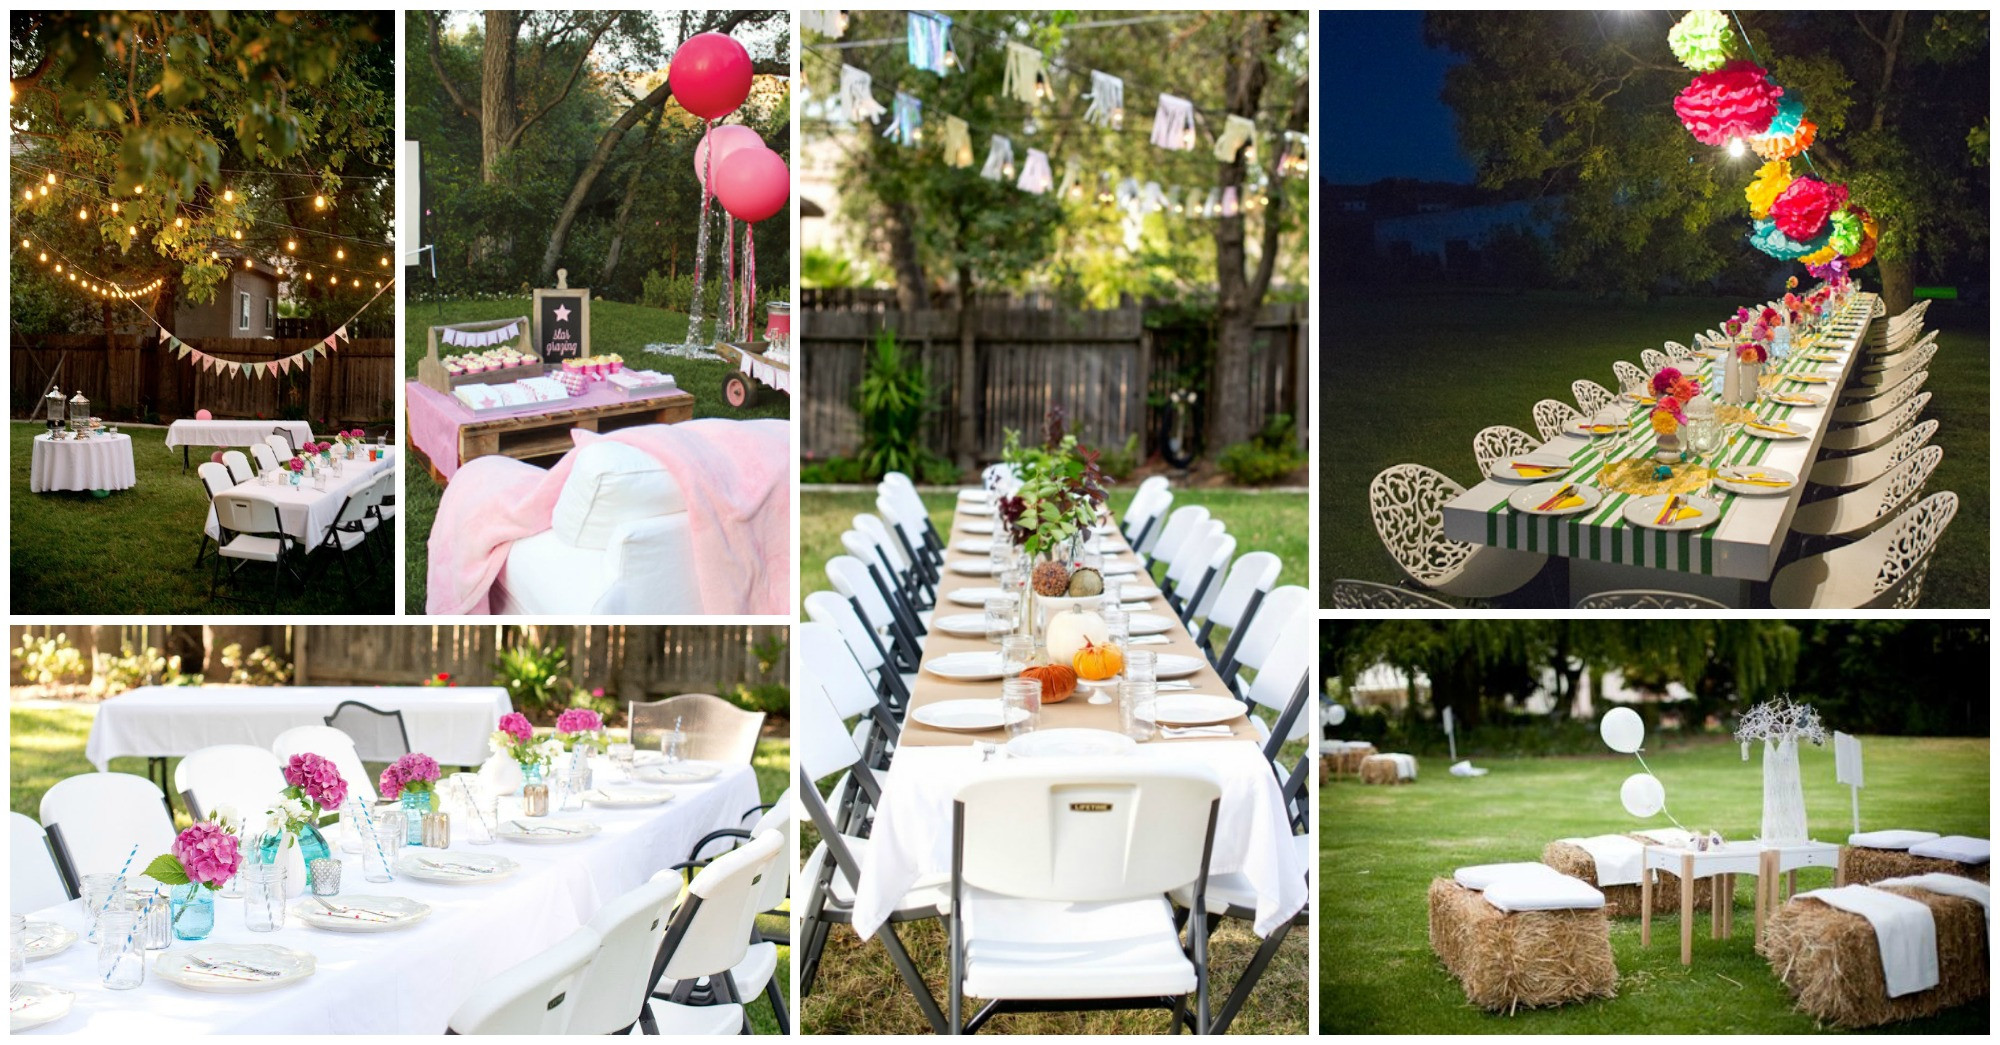 Backyard Party Decorating Ideas Pinterest
 Backyard Party Decorations For Unfor table Moments